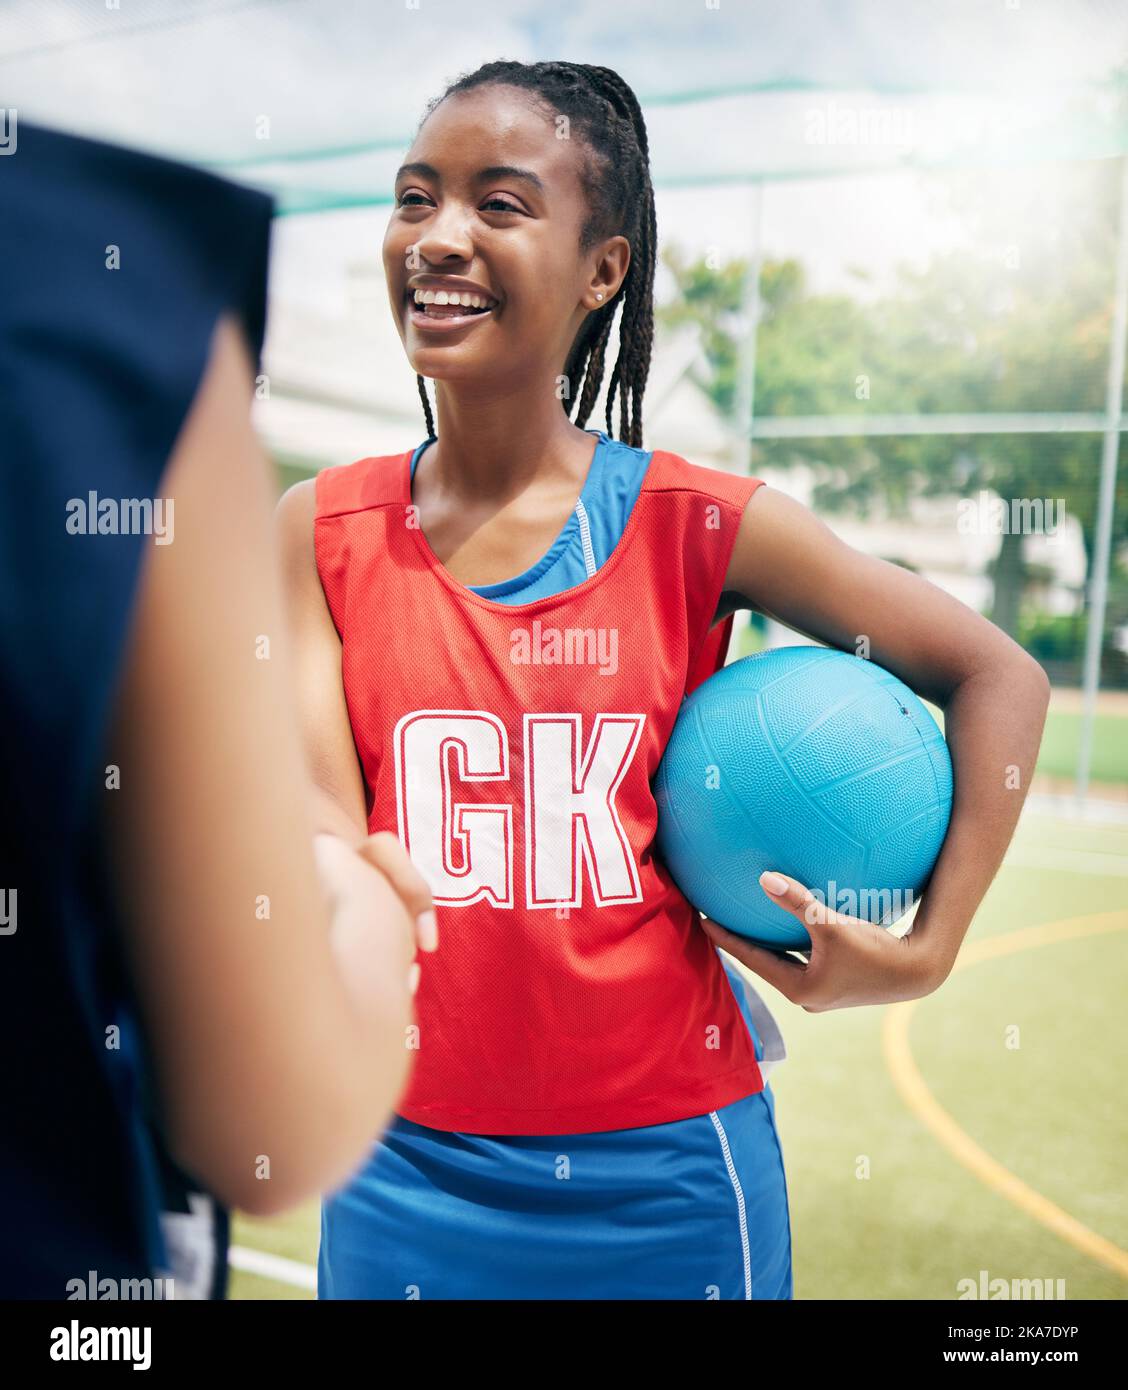 Black woman, netball player and handshake on court in fitness game, workout match or training competition exercise. Smile, happy and sports women in Stock Photo